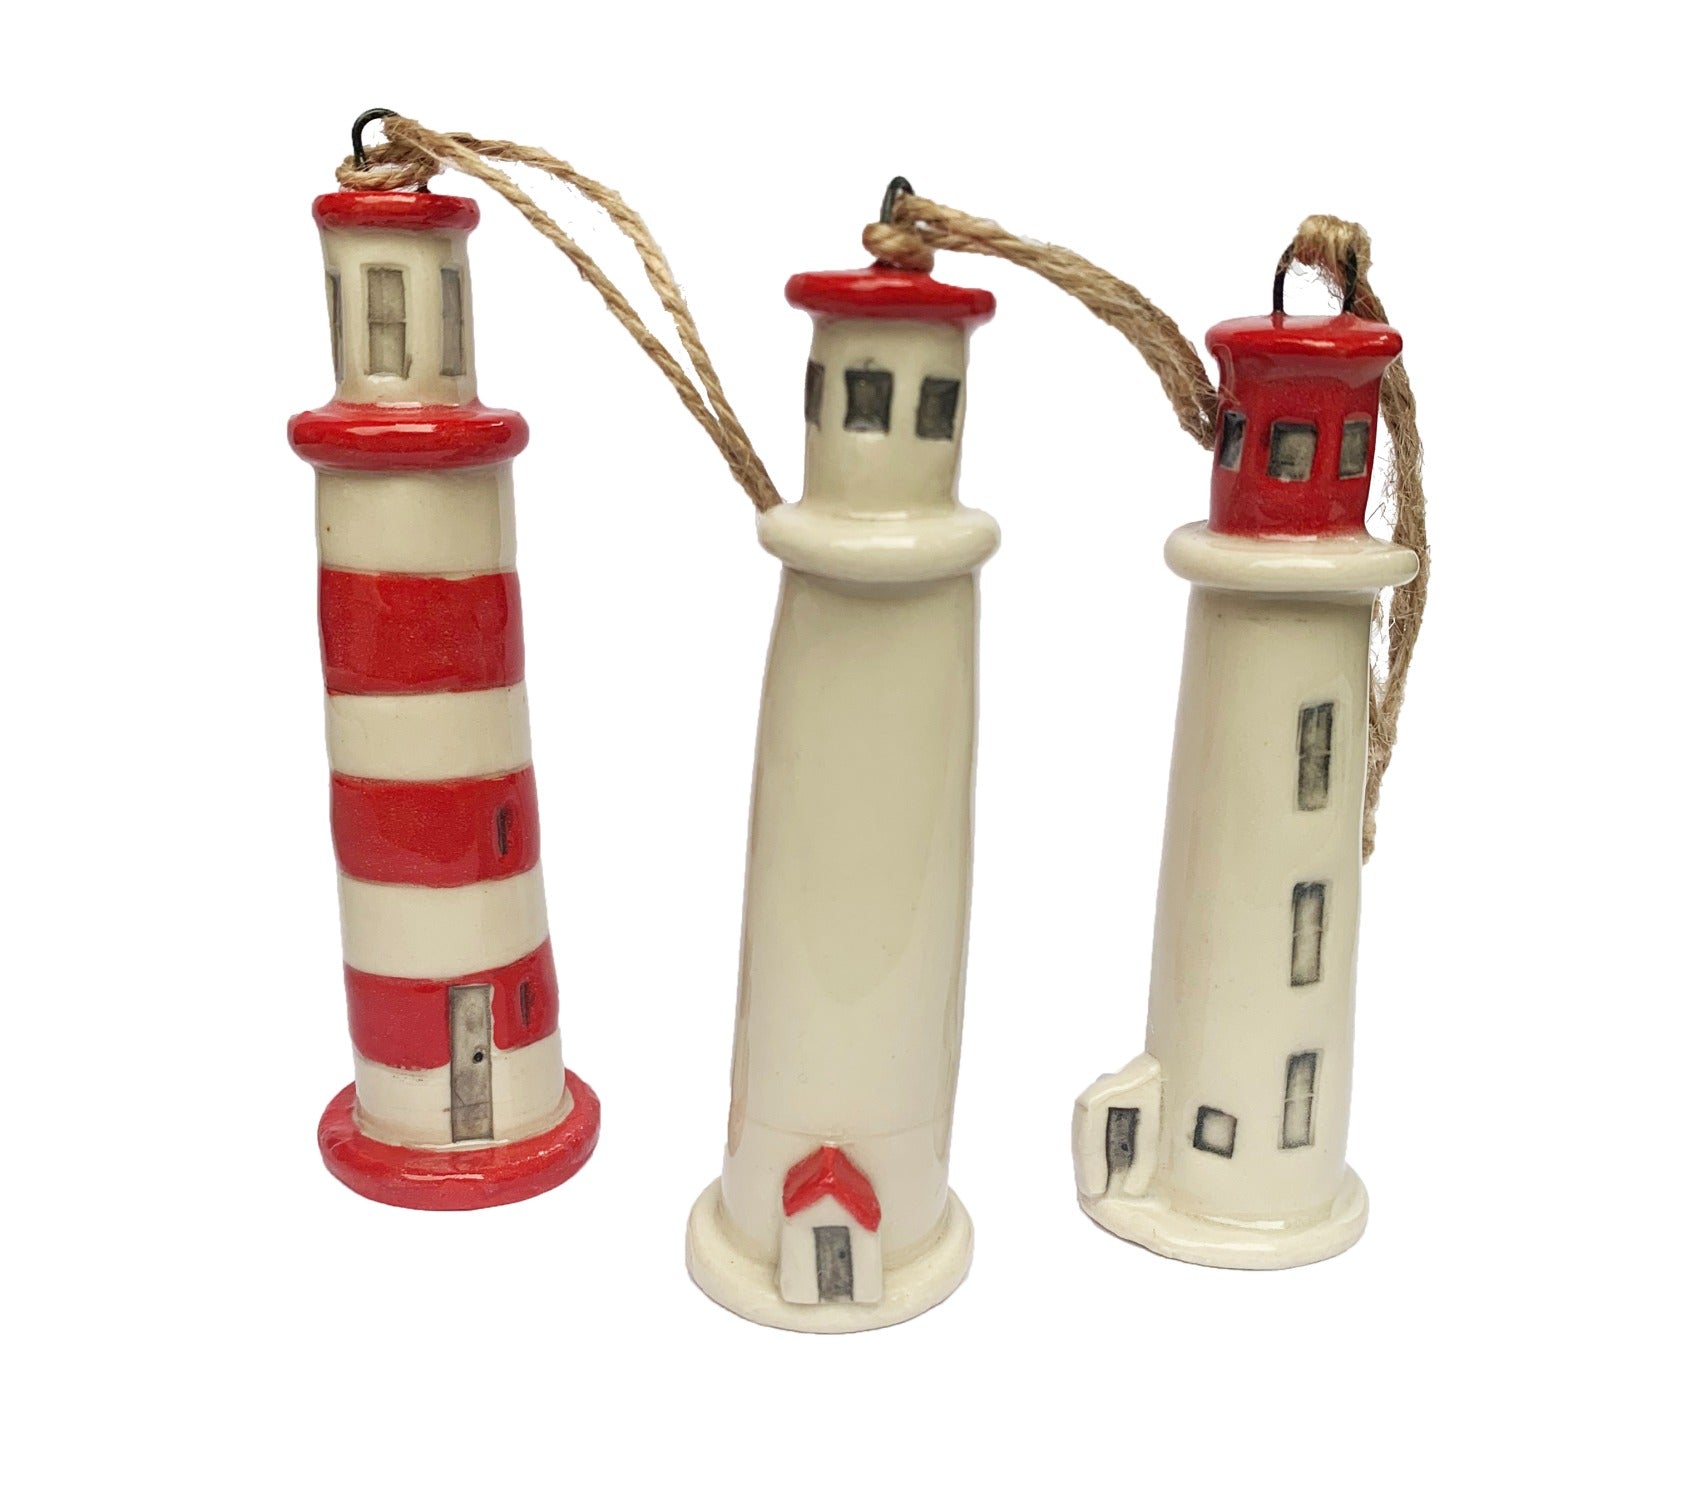 Three hand painted ceramic red and white lighthouse ornaments made in Nova Scotia, Canada.